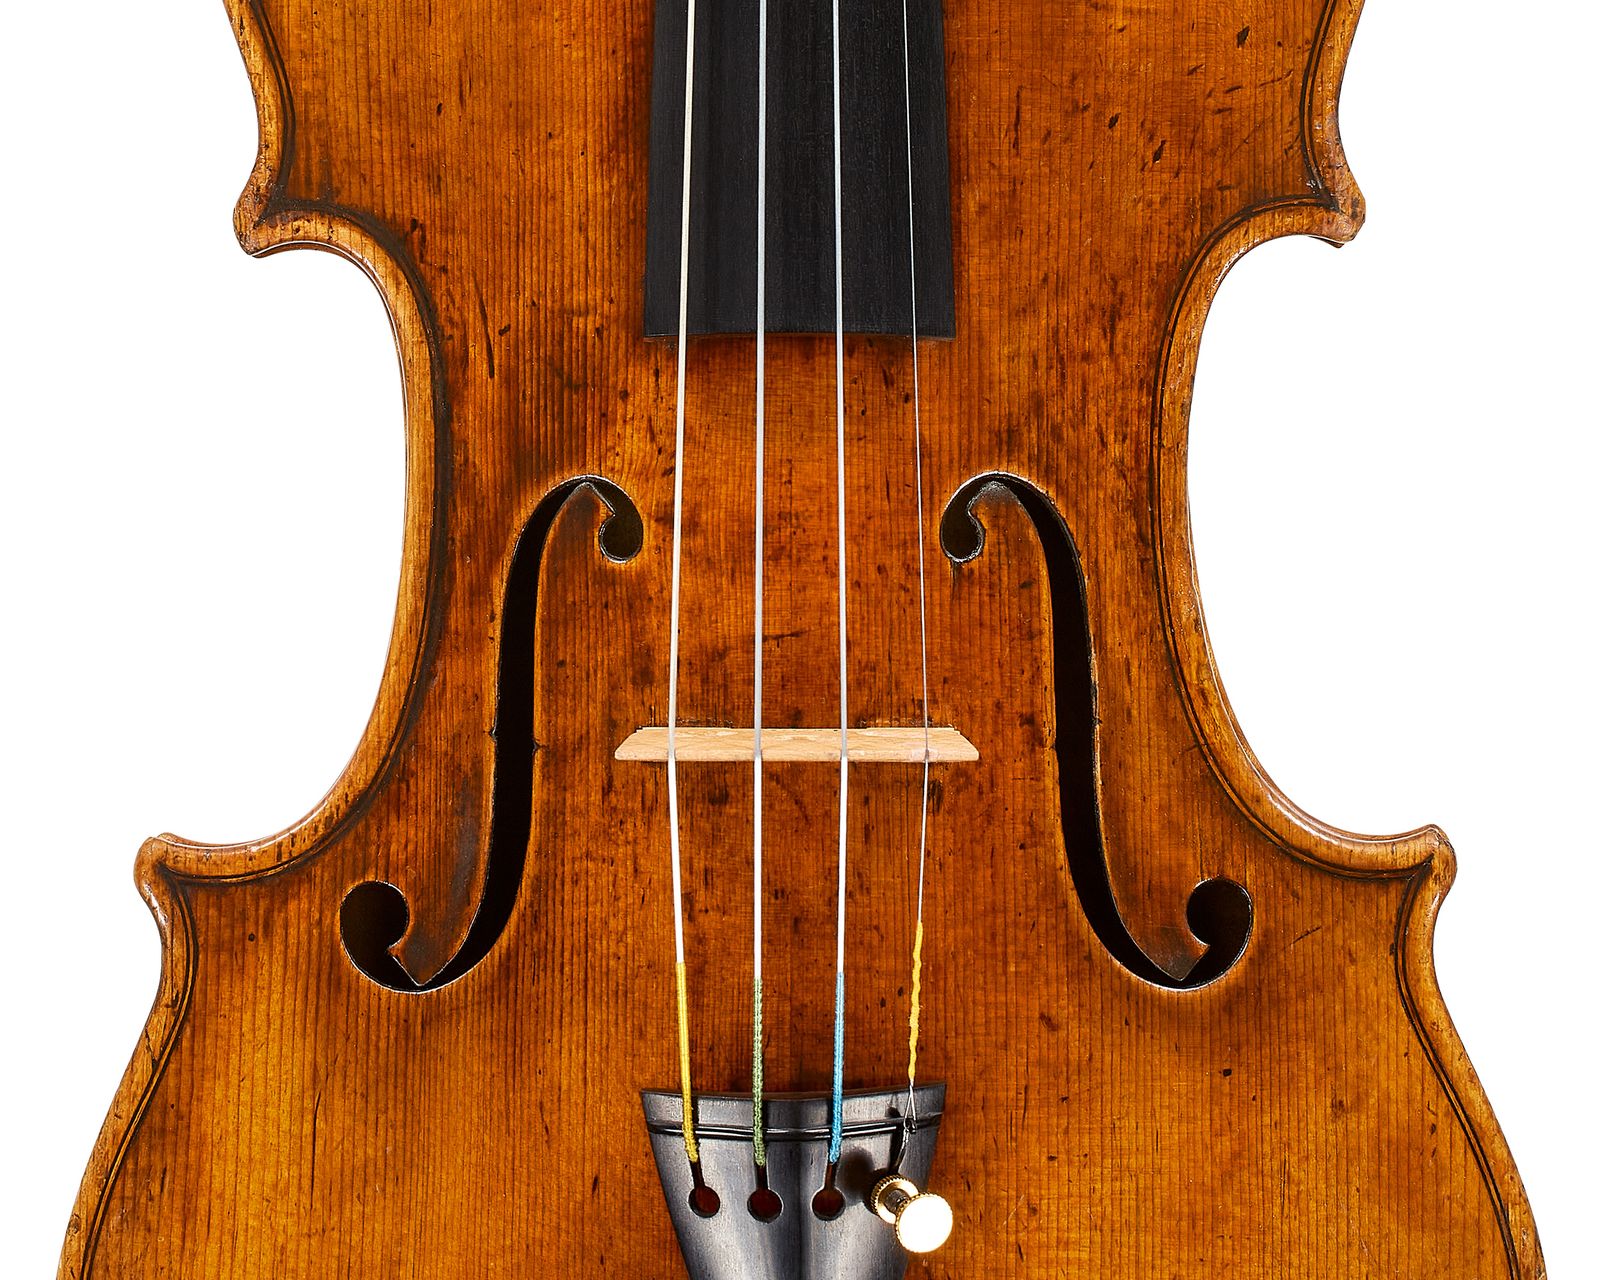 Tag fat dobbeltlag Barn This 308-Year-Old Violin Could Become the Most Expensive Ever Sold | Smart  News| Smithsonian Magazine